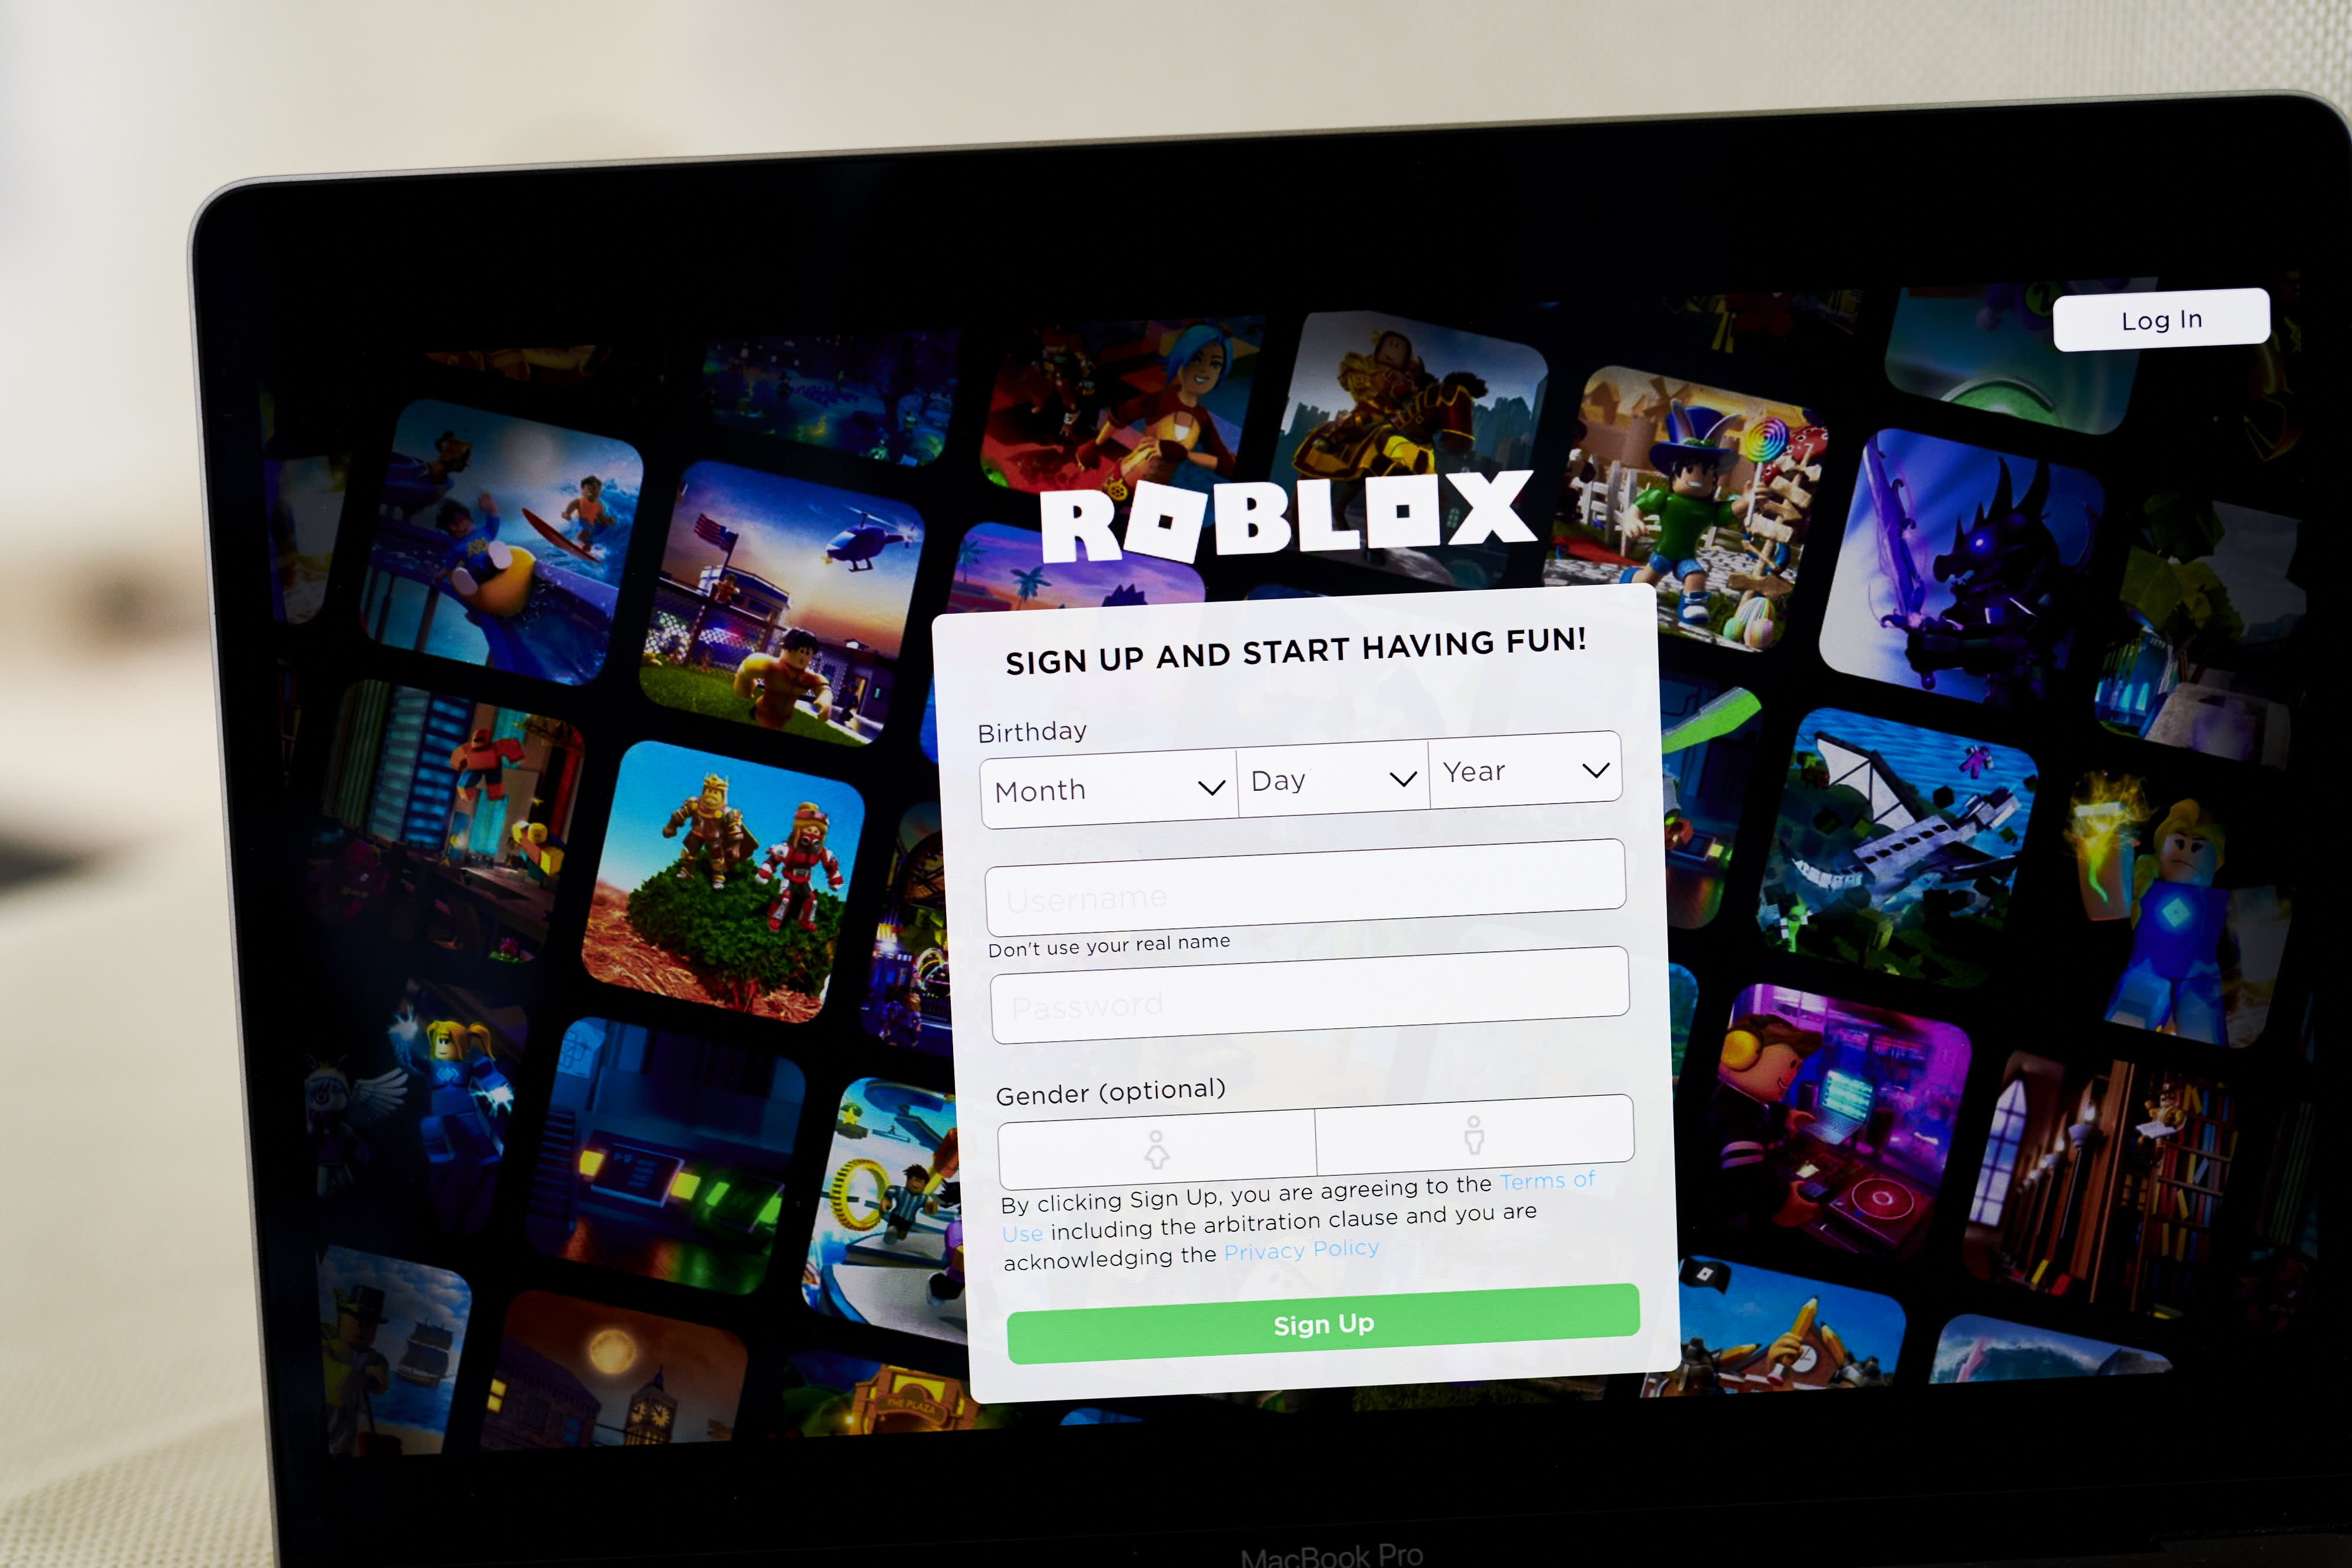 Roblox (RBLX) goes public with a bet on the metaverse